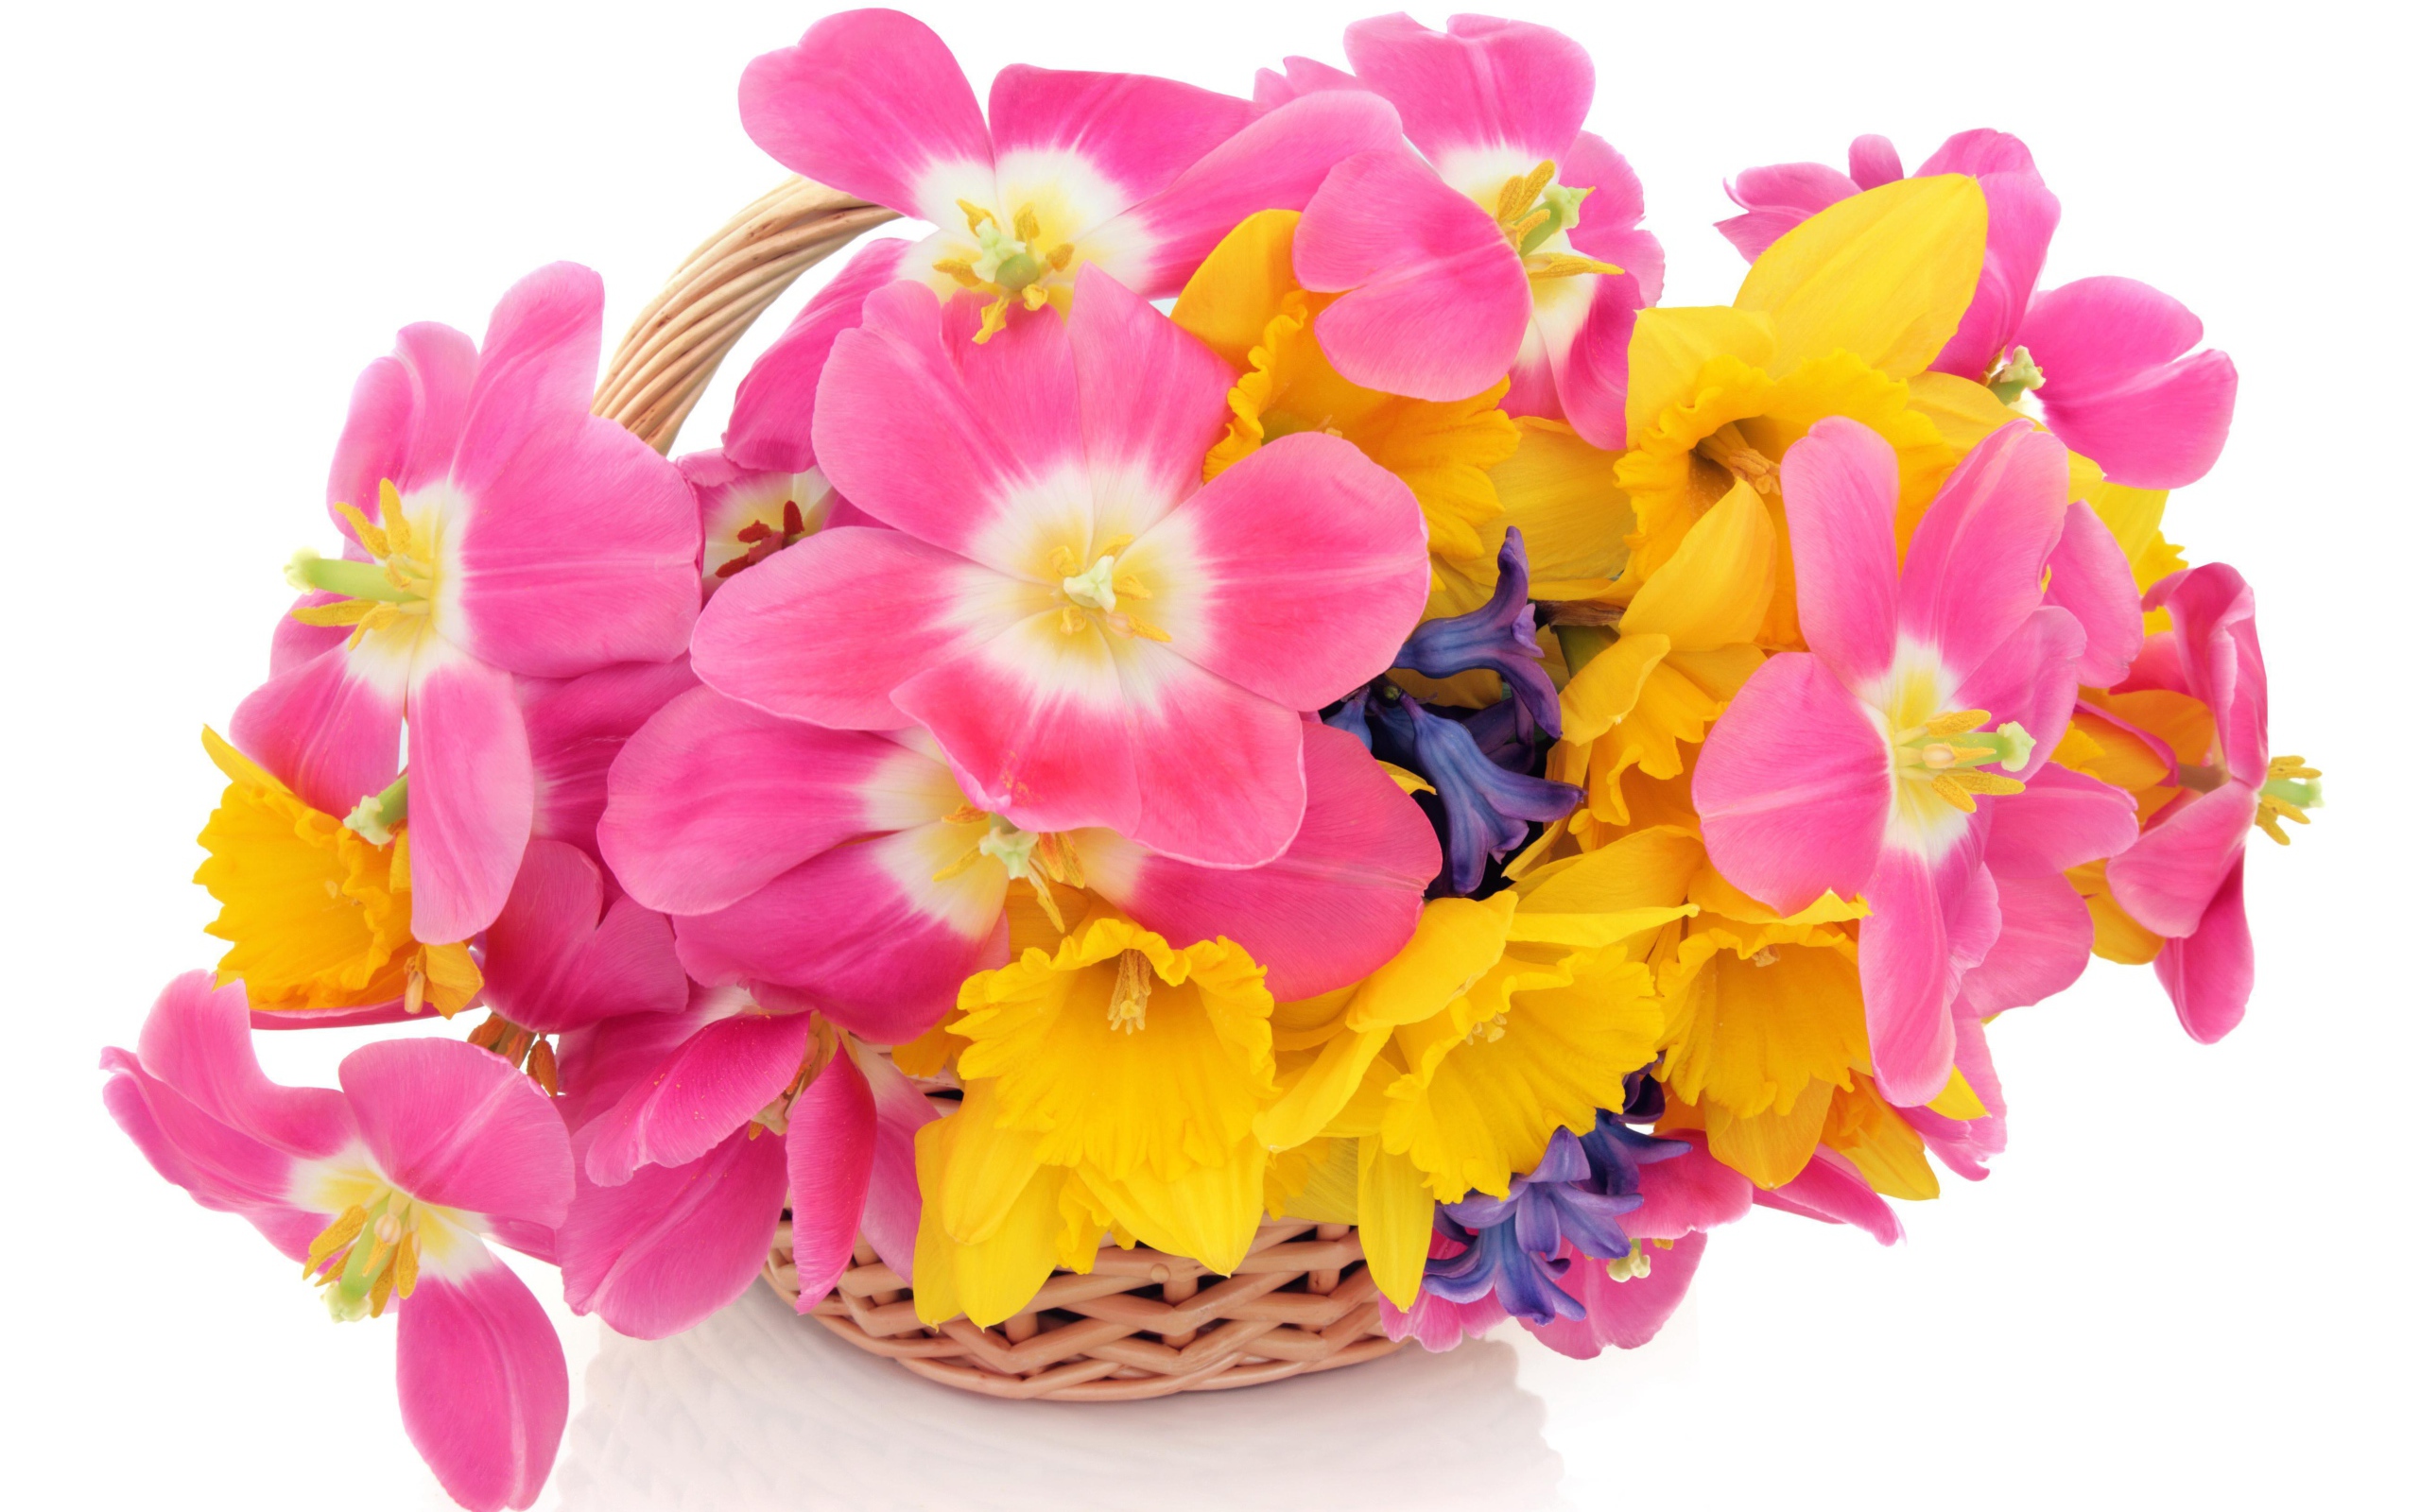 Pink tulips, daffodils and hyacinths in a basket on a white background